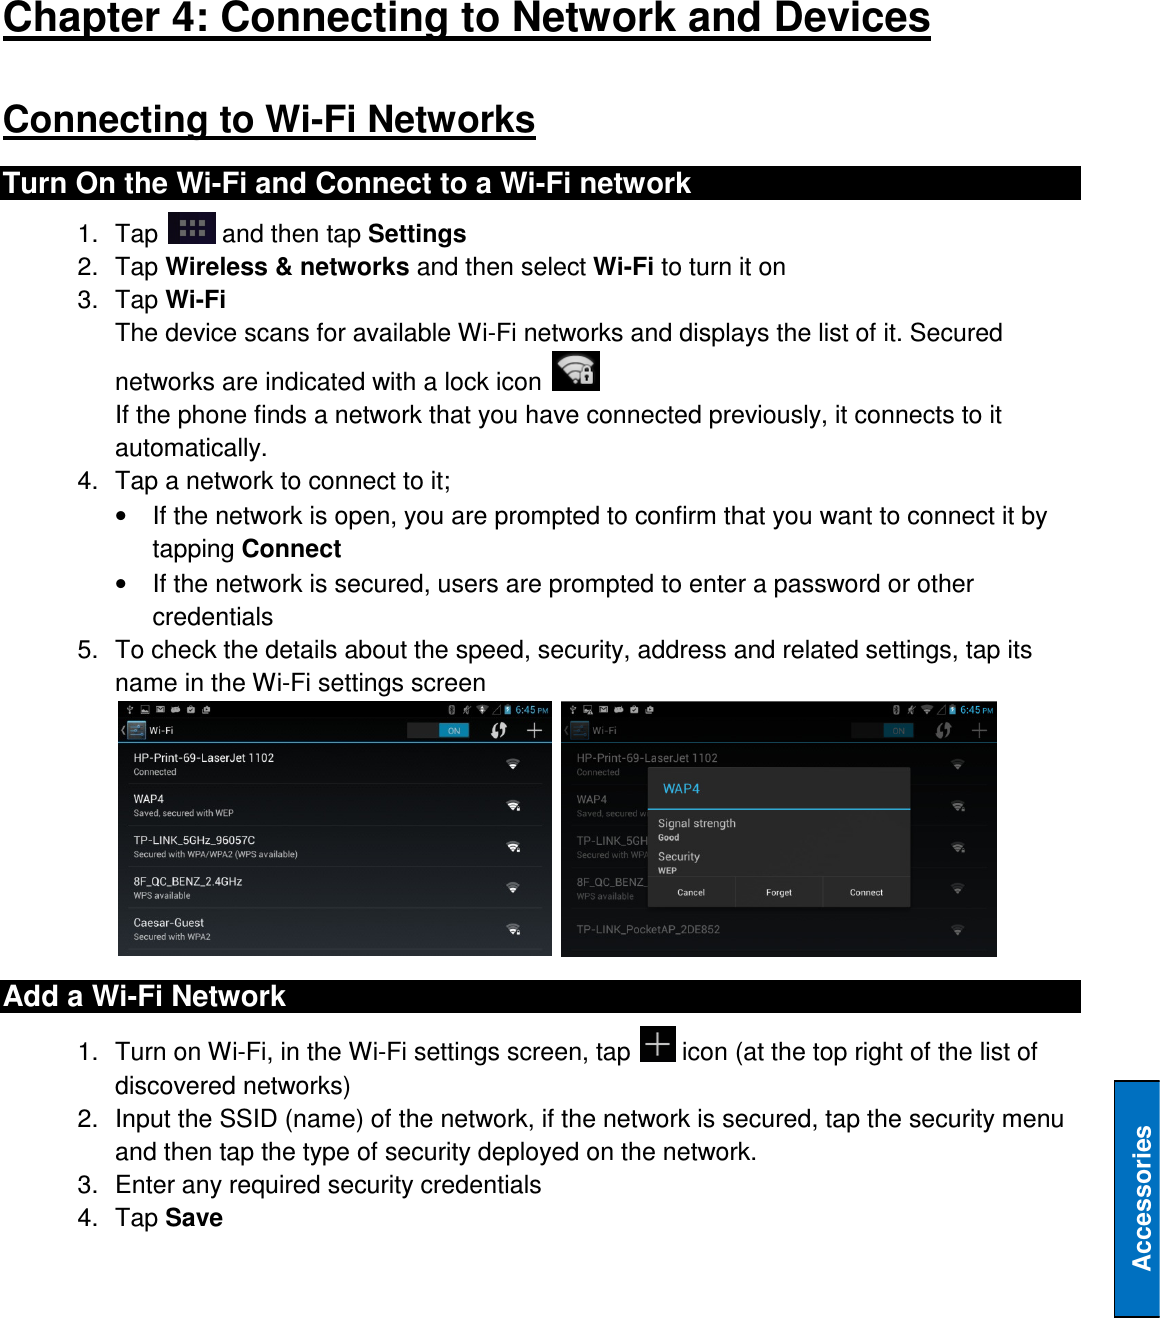   Accessories Chapter 4: Connecting to Network and Devices Connecting to Wi-Fi Networks Turn On the Wi-Fi and Connect to a Wi-Fi network 1.  Tap   and then tap Settings 2.  Tap Wireless &amp; networks and then select Wi-Fi to turn it on 3.  Tap Wi-Fi The device scans for available Wi-Fi networks and displays the list of it. Secured networks are indicated with a lock icon   If the phone finds a network that you have connected previously, it connects to it automatically. 4.  Tap a network to connect to it; •  If the network is open, you are prompted to confirm that you want to connect it by tapping Connect •  If the network is secured, users are prompted to enter a password or other credentials 5.  To check the details about the speed, security, address and related settings, tap its name in the Wi-Fi settings screen    Add a Wi-Fi Network 1.  Turn on Wi-Fi, in the Wi-Fi settings screen, tap   icon (at the top right of the list of discovered networks) 2.  Input the SSID (name) of the network, if the network is secured, tap the security menu and then tap the type of security deployed on the network. 3.  Enter any required security credentials 4.  Tap Save 